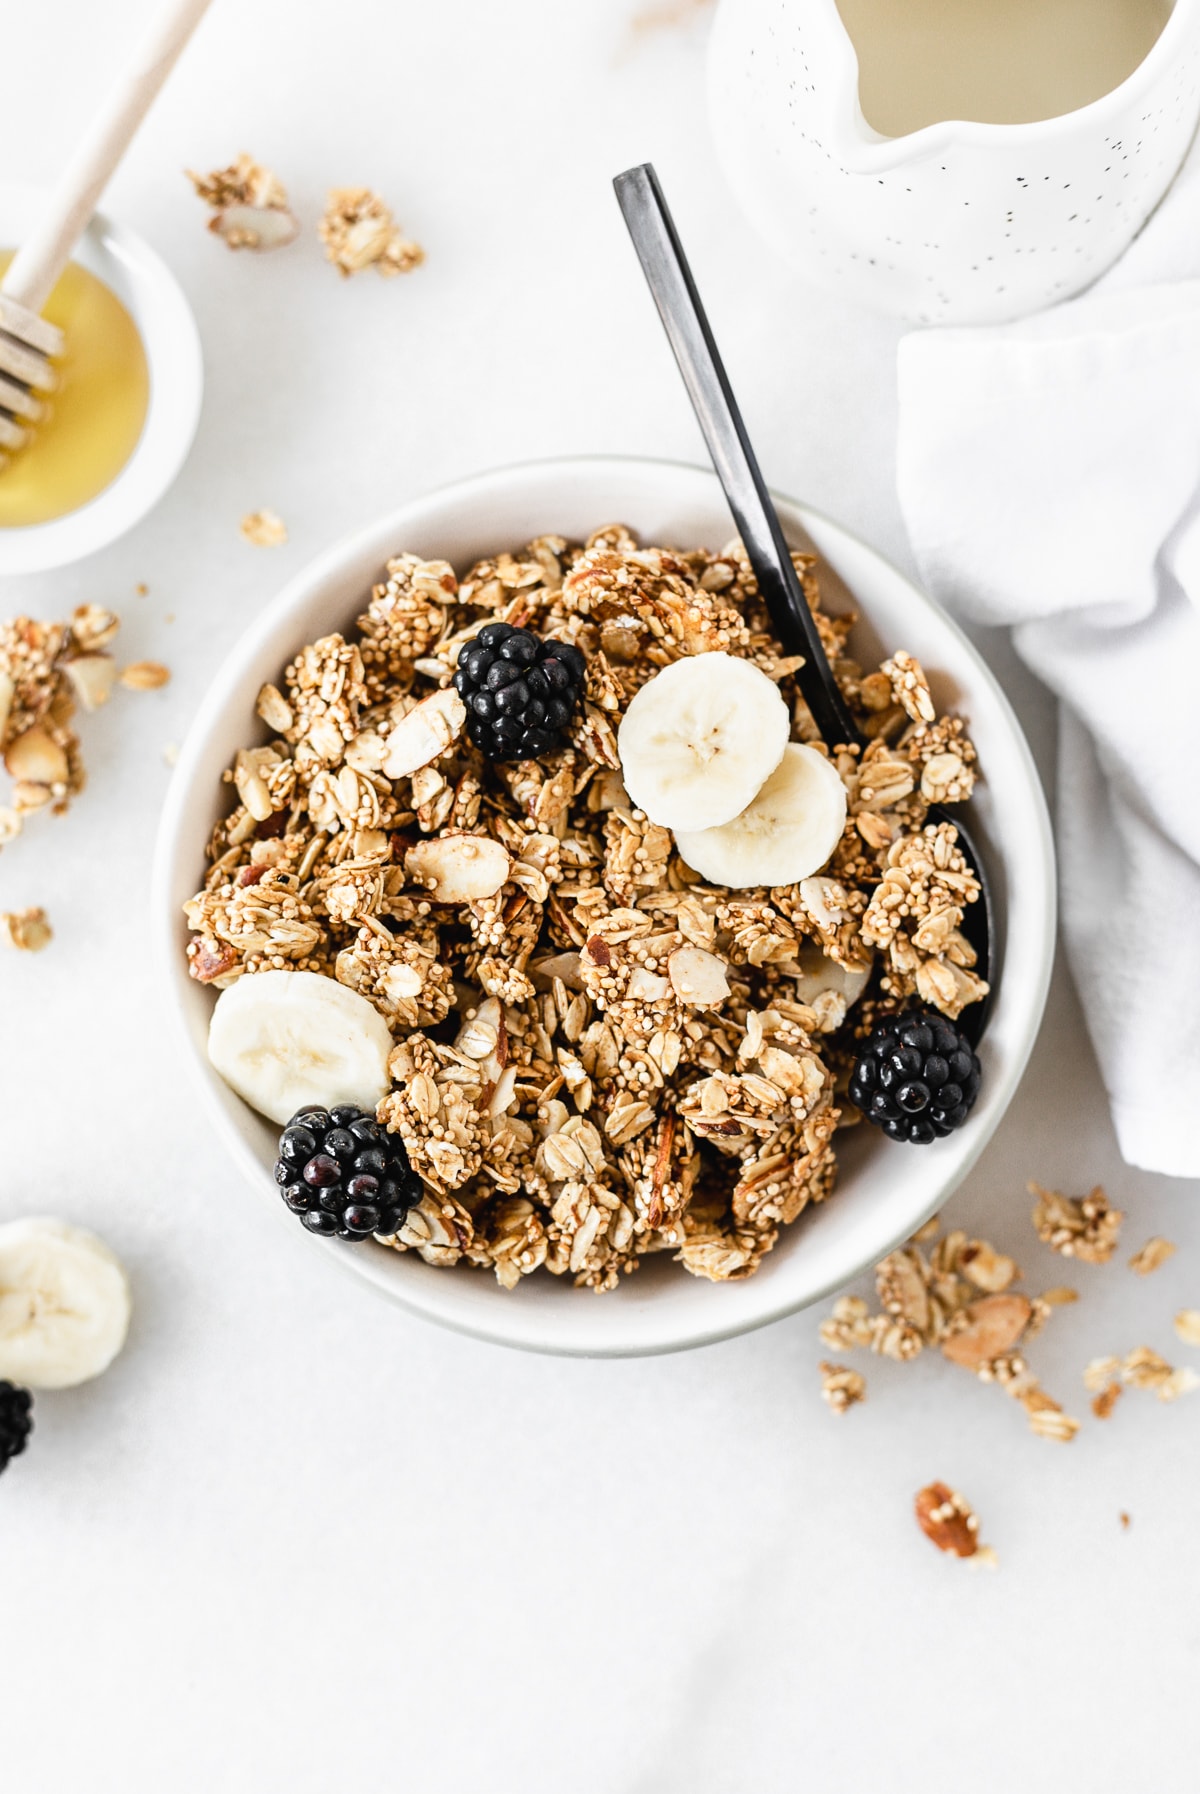 Overhead view of a bowl of honey almond quinoa granola topped with banana slices and blackberries with a black spoon in it.